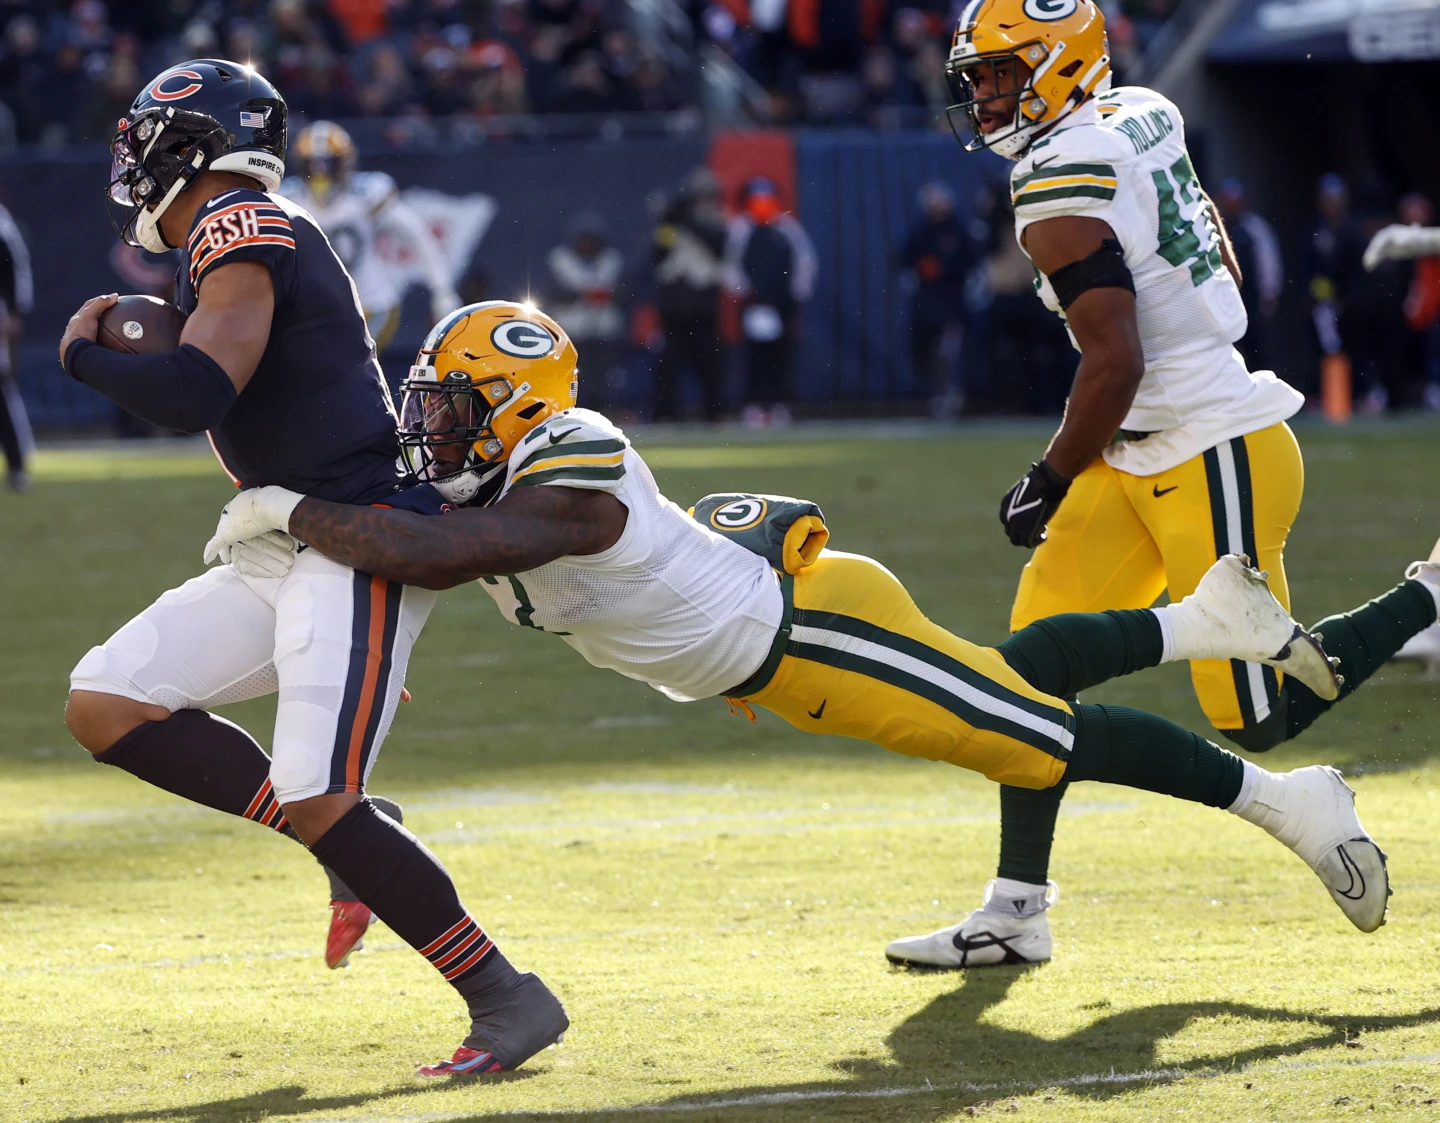 Defense’s resurgence plays major role in getting Packers into postseason